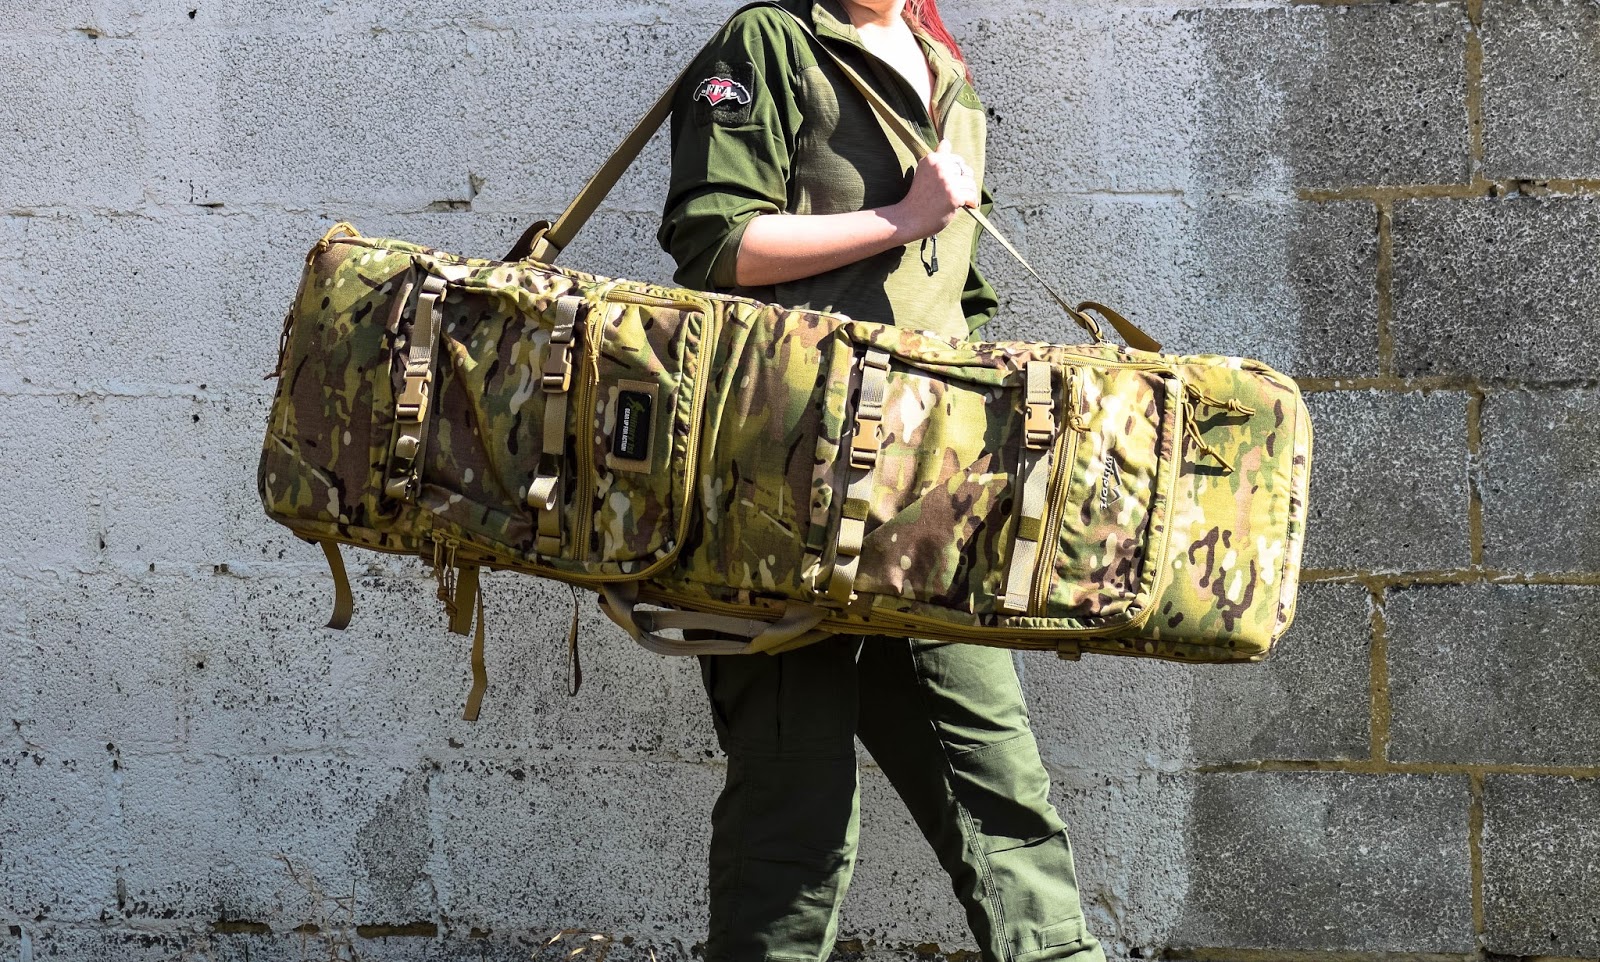 WISPORT RIFLE CASE 120+ MULTICAM FROM MILITARY 1ST! - Femme Fatale Airsoft